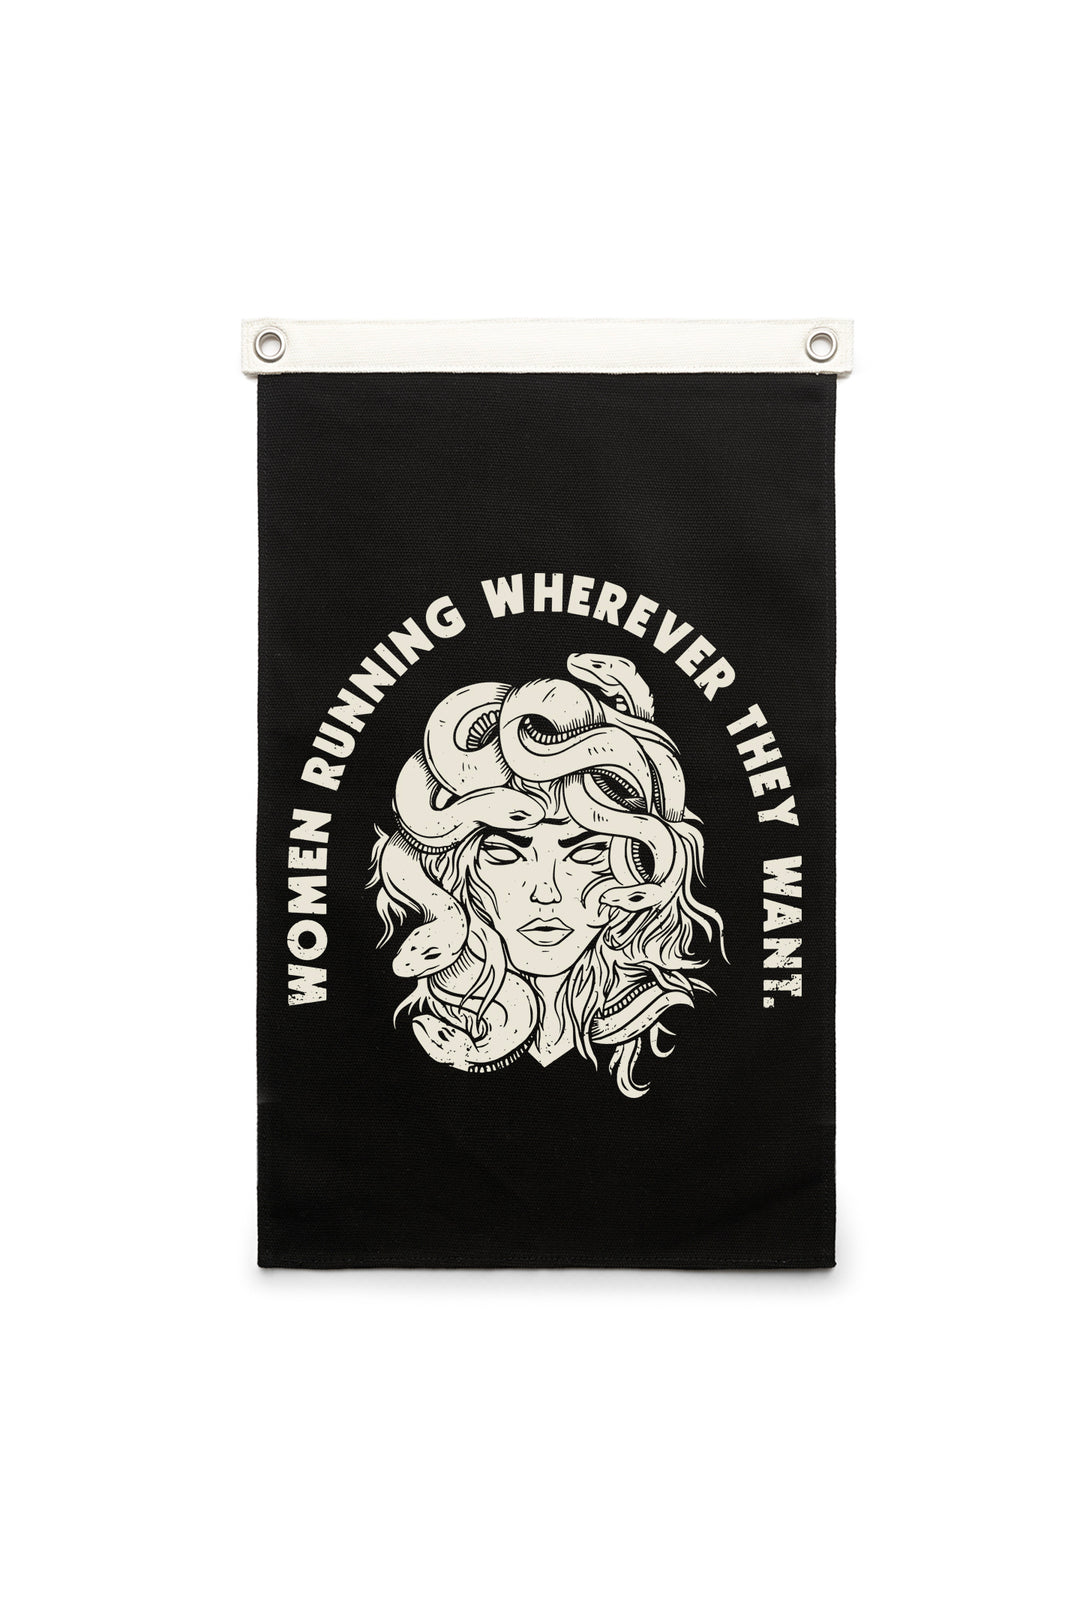 Women Running Wherever They Want Canvas Banner